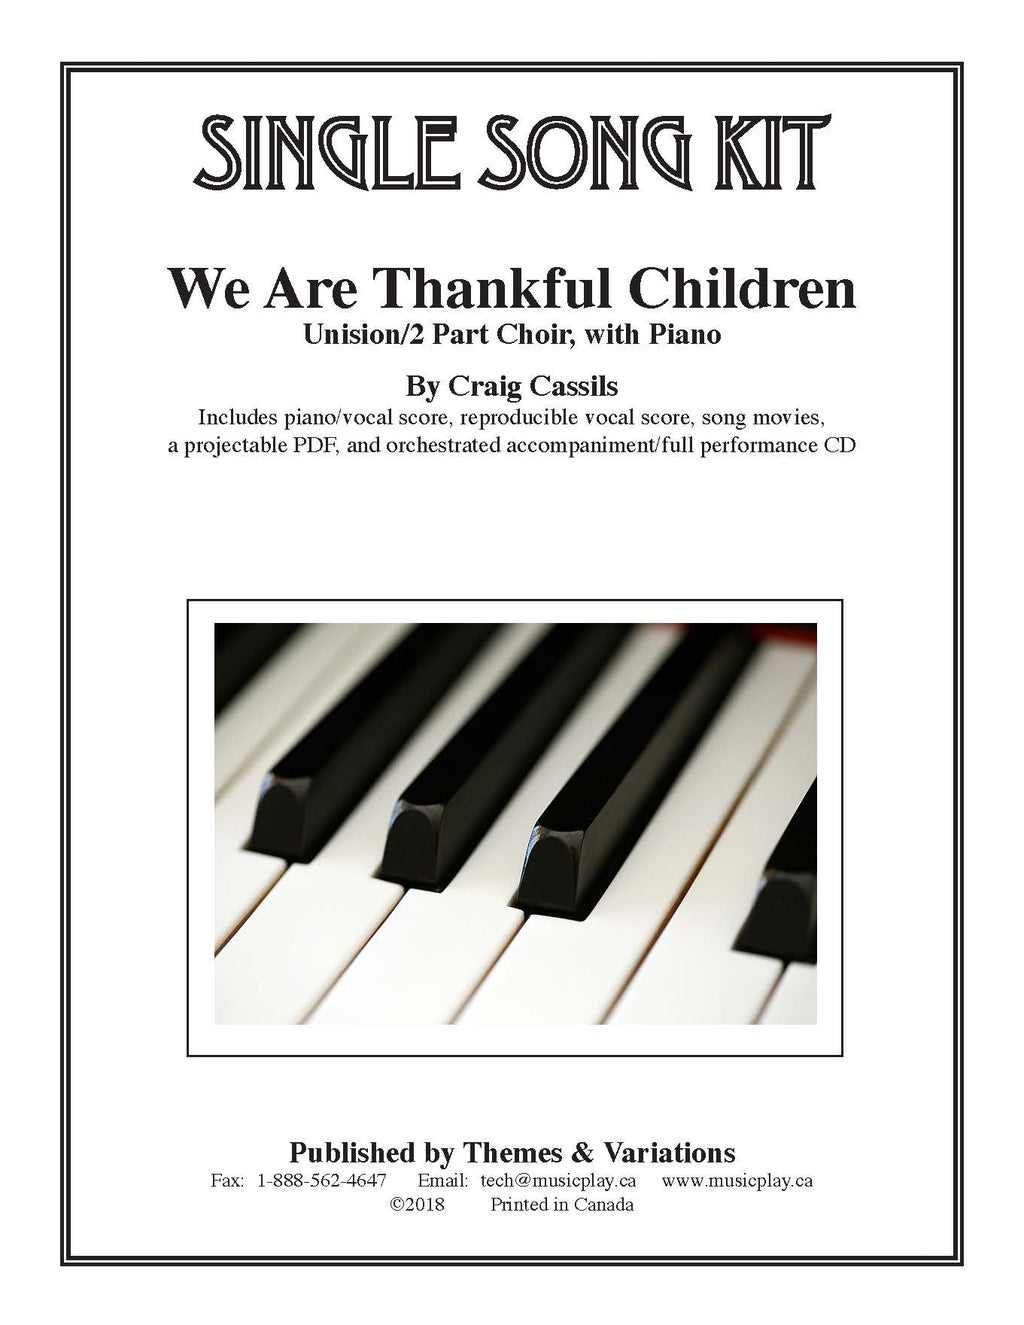 We Are Thankful Children Single Song Kit